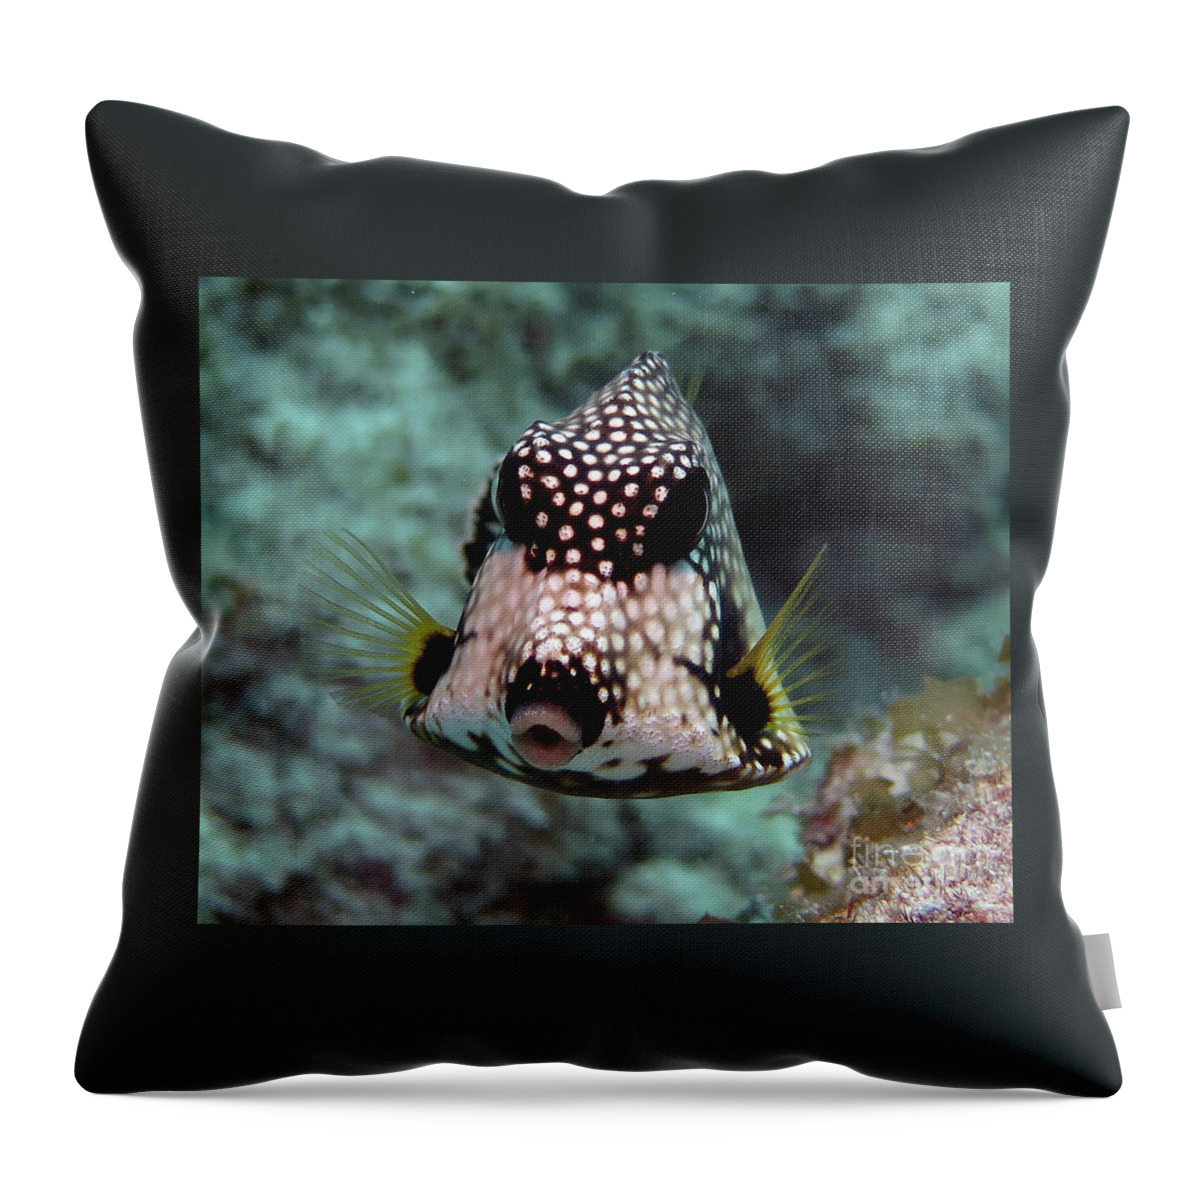 Underwater Throw Pillow featuring the photograph Smooth Trunkfish by Daryl Duda